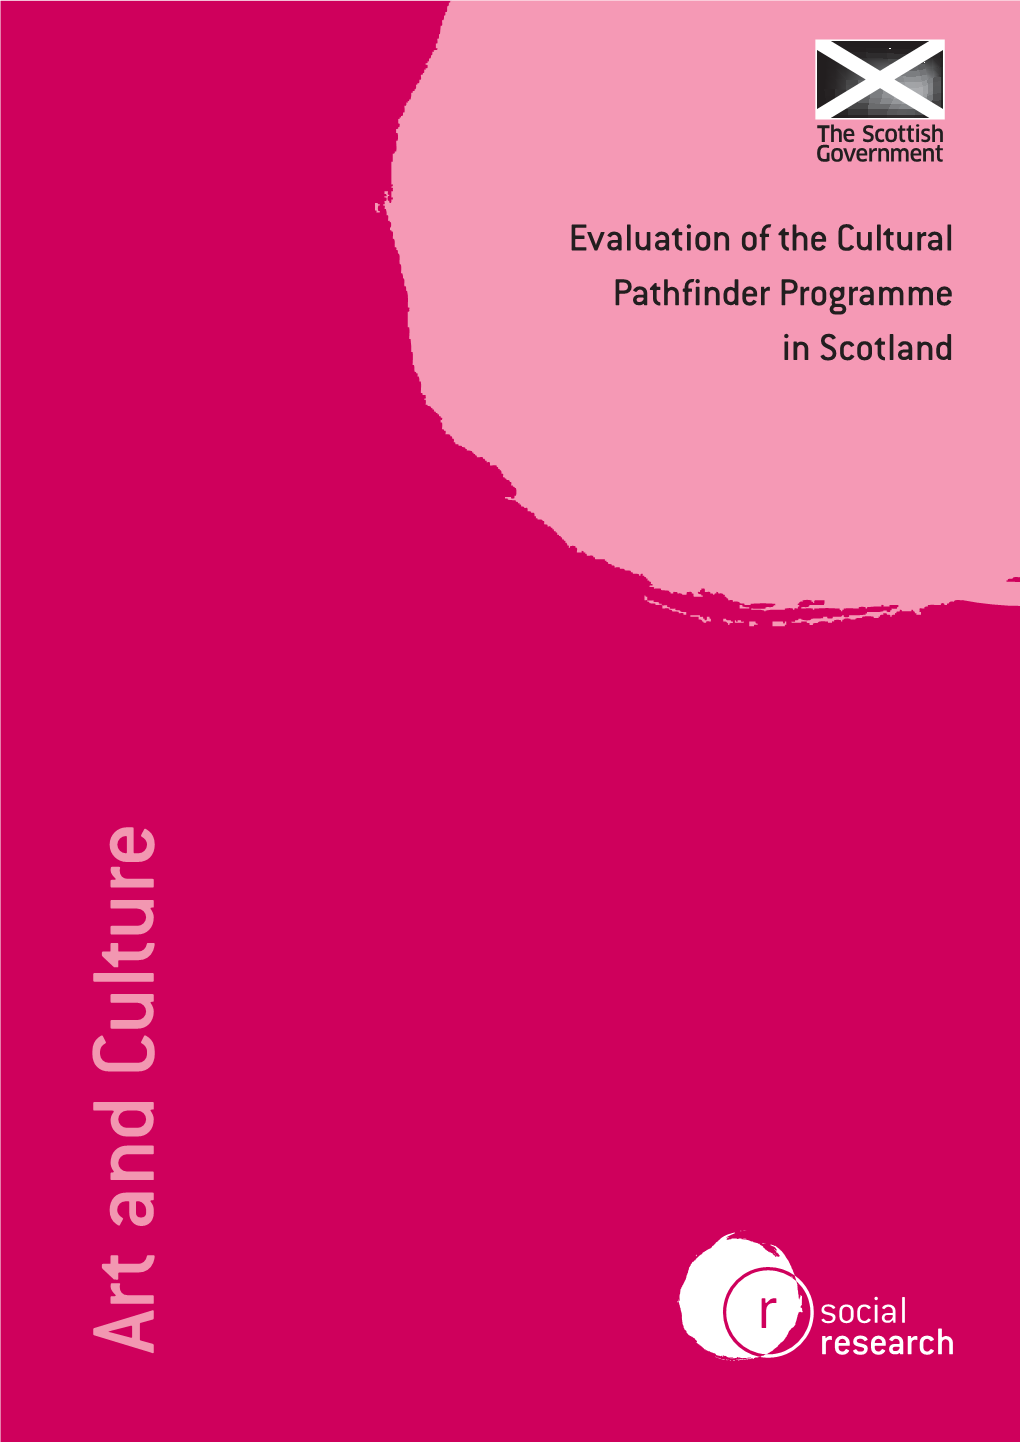 Evaluation of the Cultural Pathfinder Programme in Scotland in Programme Pathfinder Cultural the of Evaluation